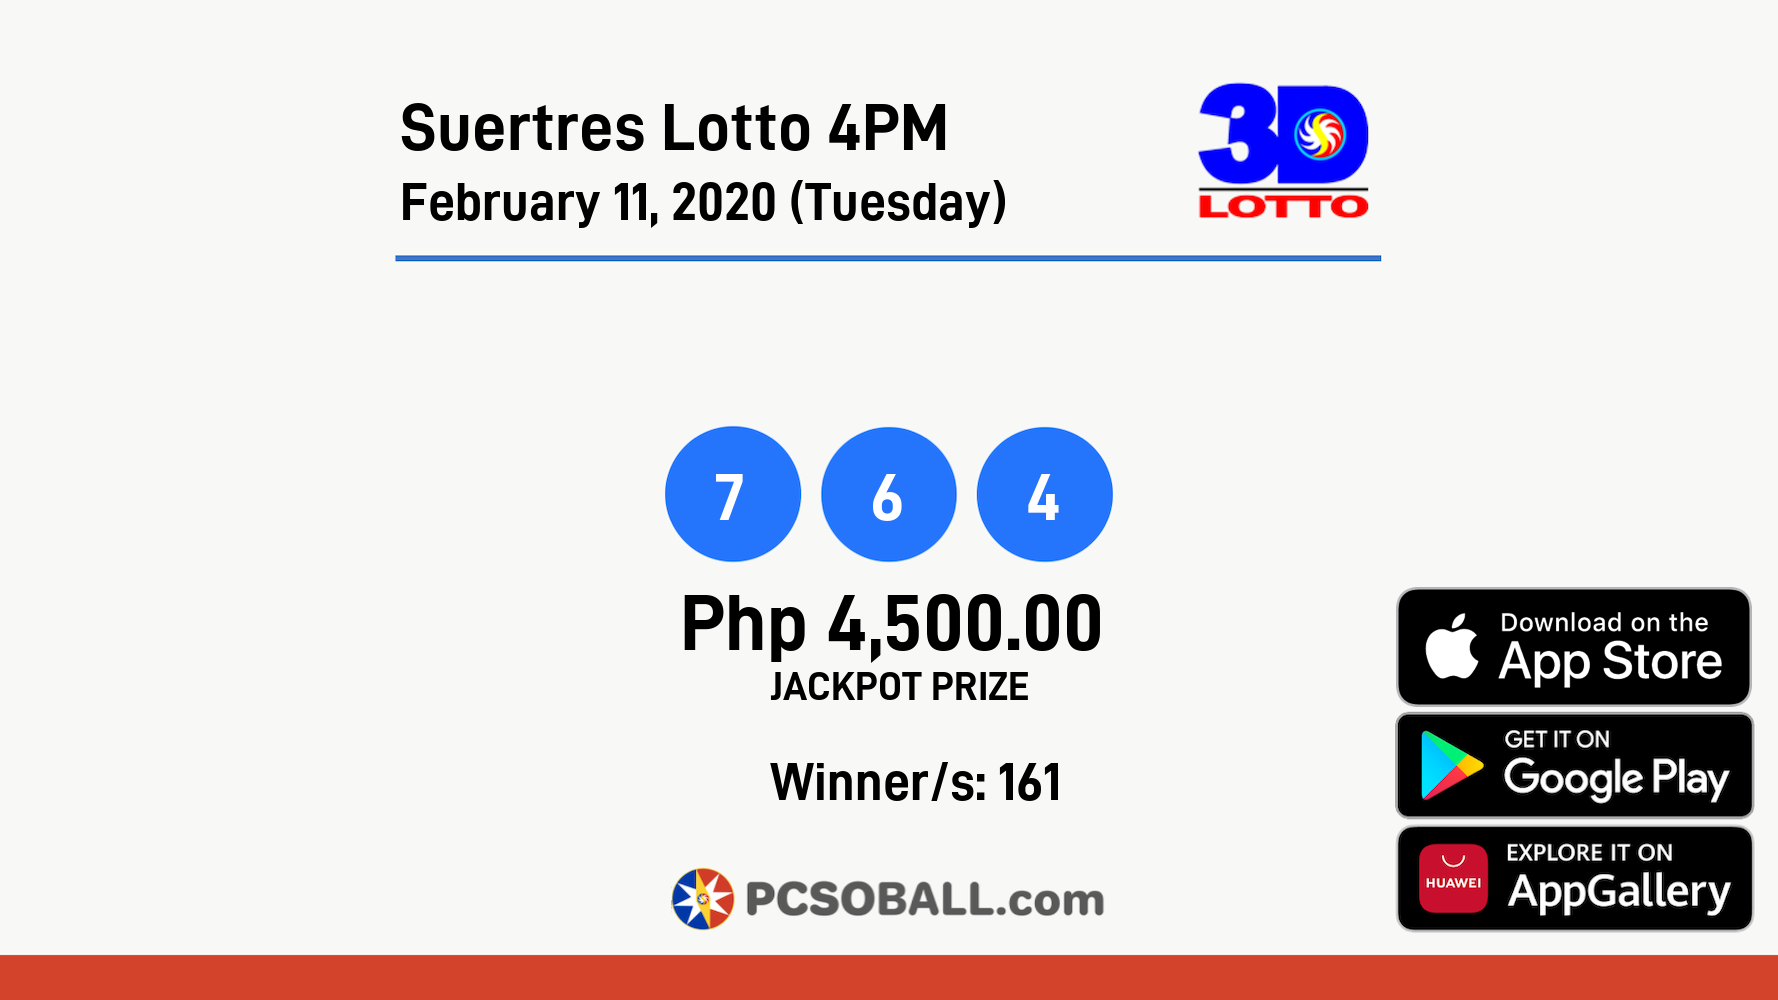 Suertres Lotto 4PM February 11, 2020 (Tuesday) Result